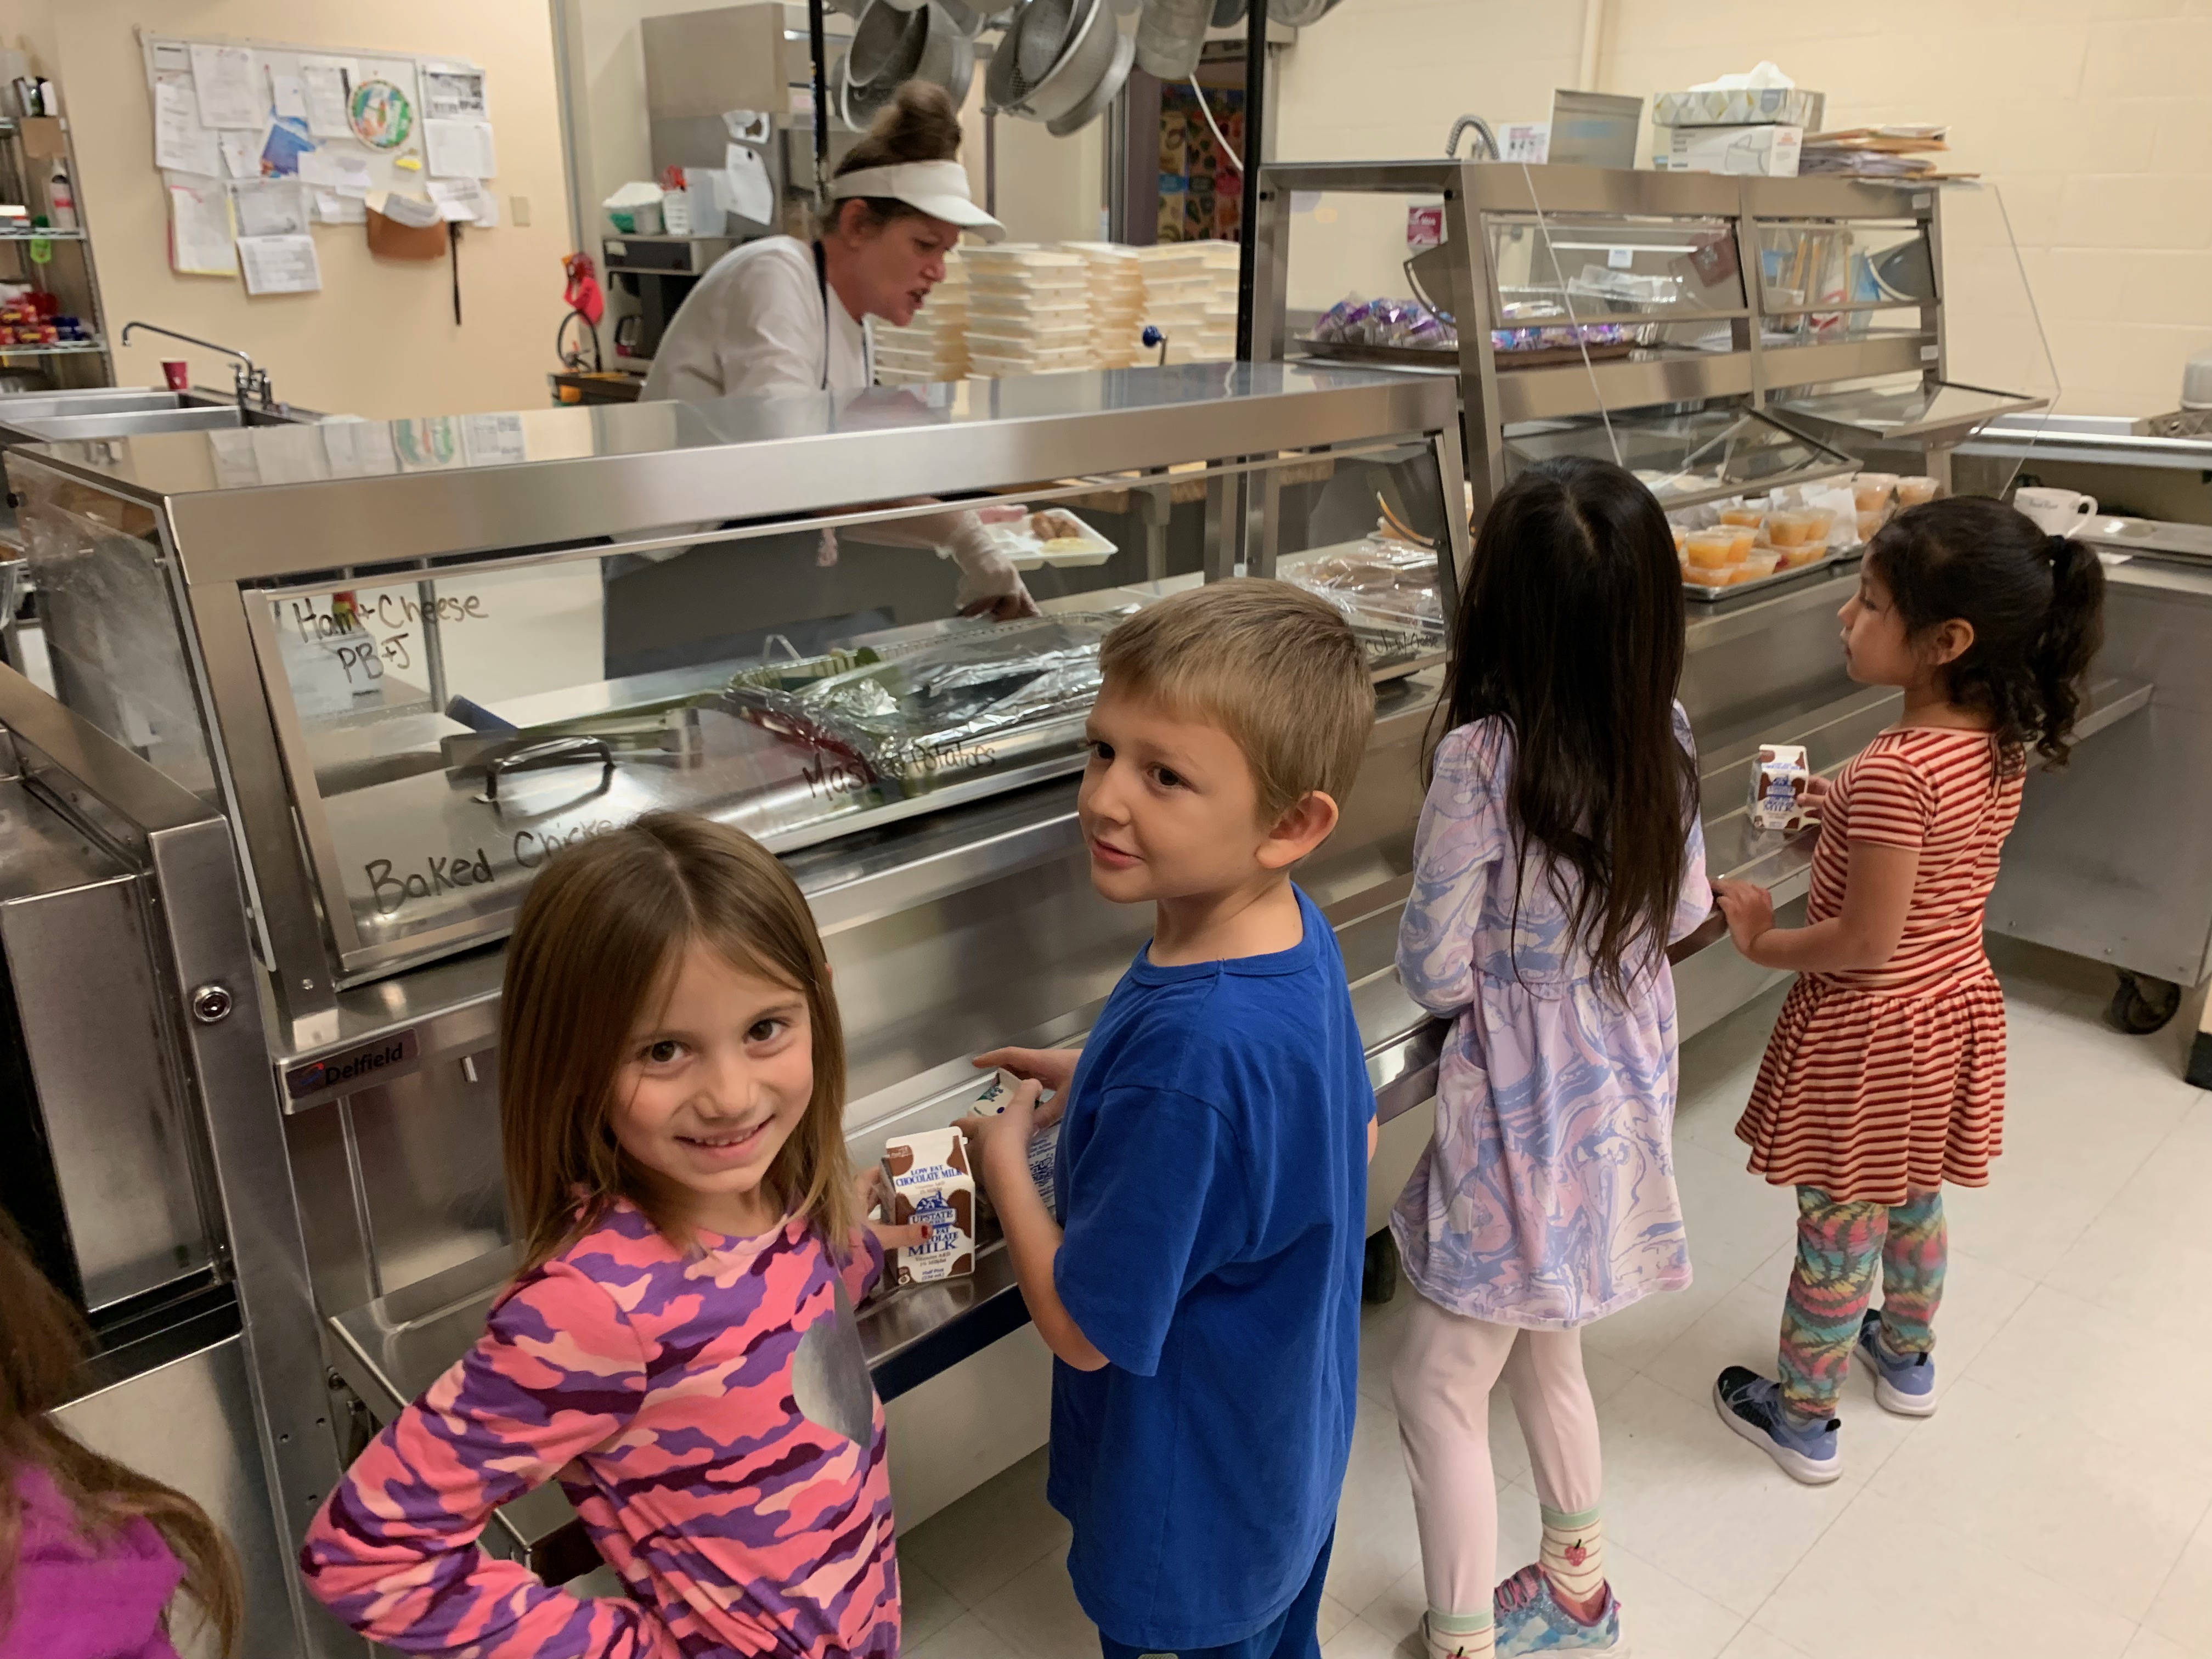 Elementary school students stand in the lunch line, ready to be served by a nice  lunch lady